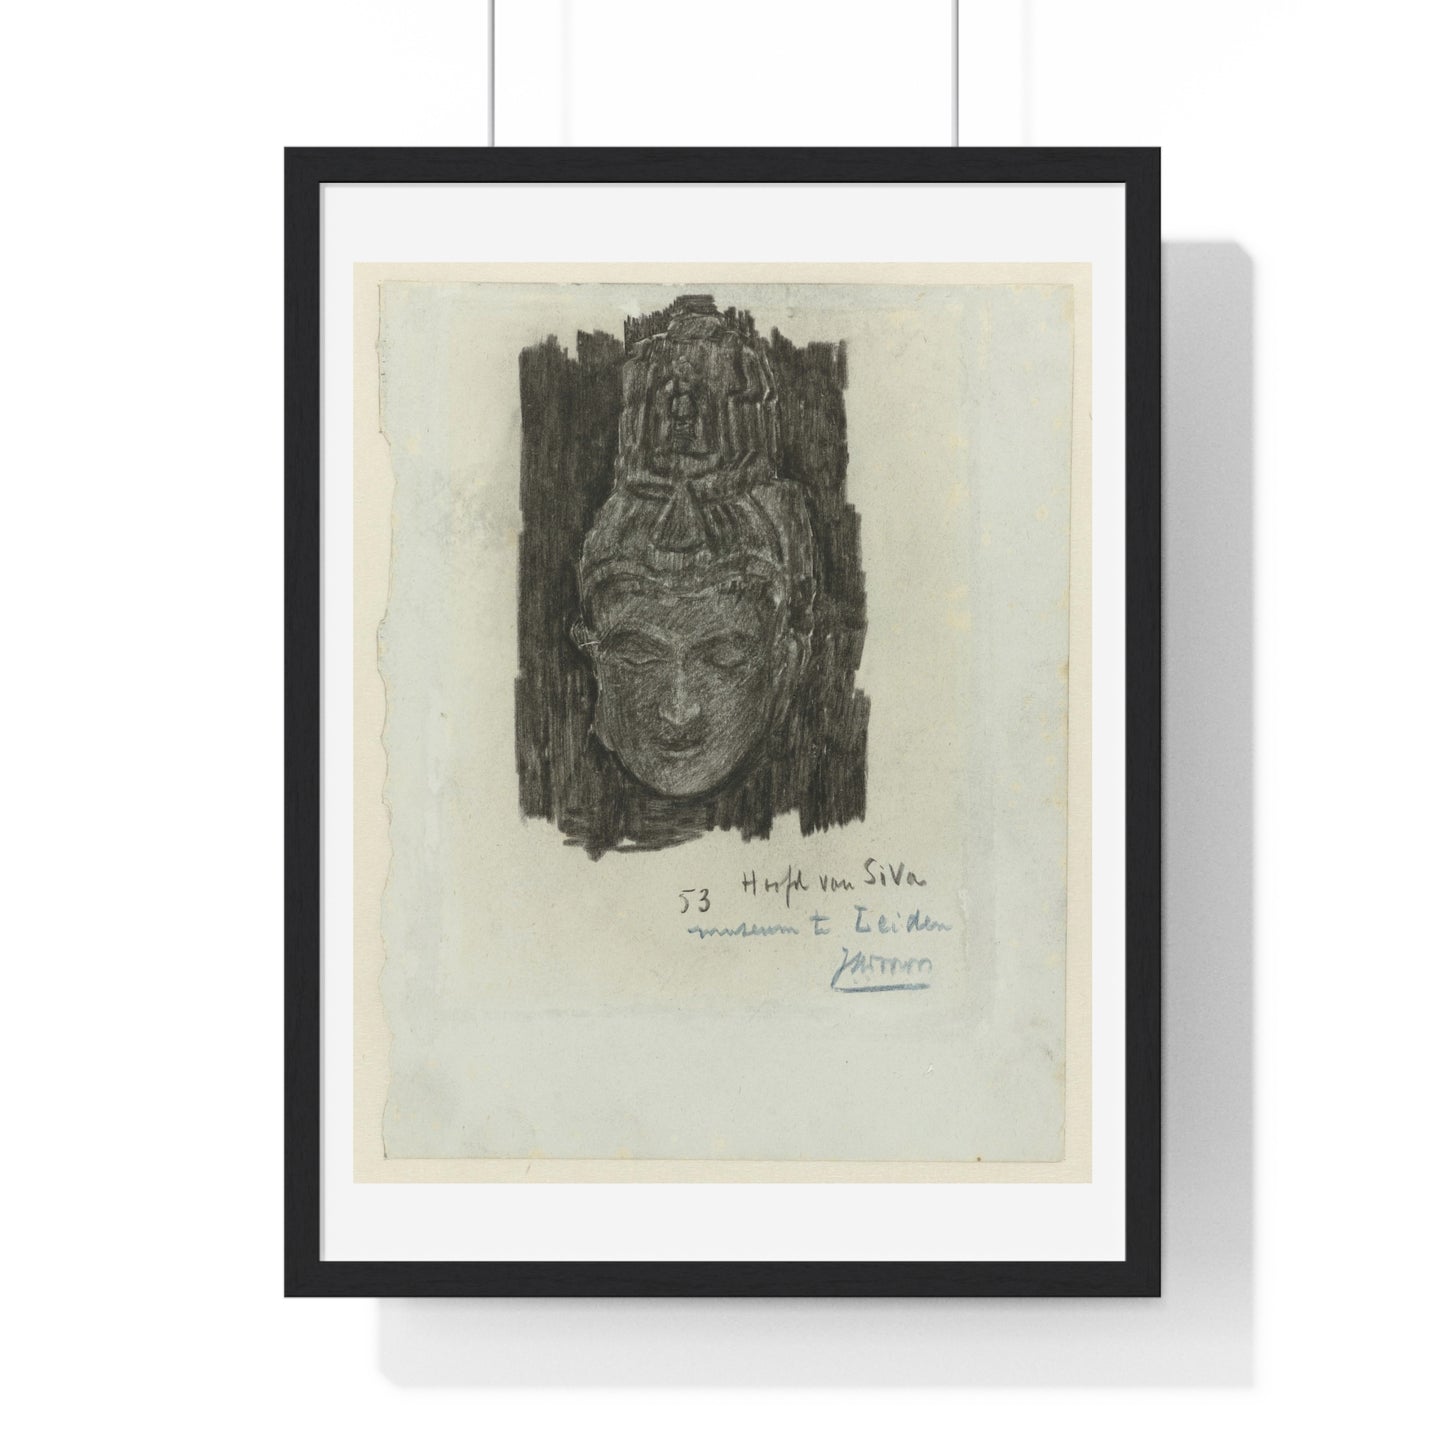 Study of Head of Shiva in the Museum of Ethnology in Leiden (1868–1928) by Jan Toorop, from the Original, Framed Print